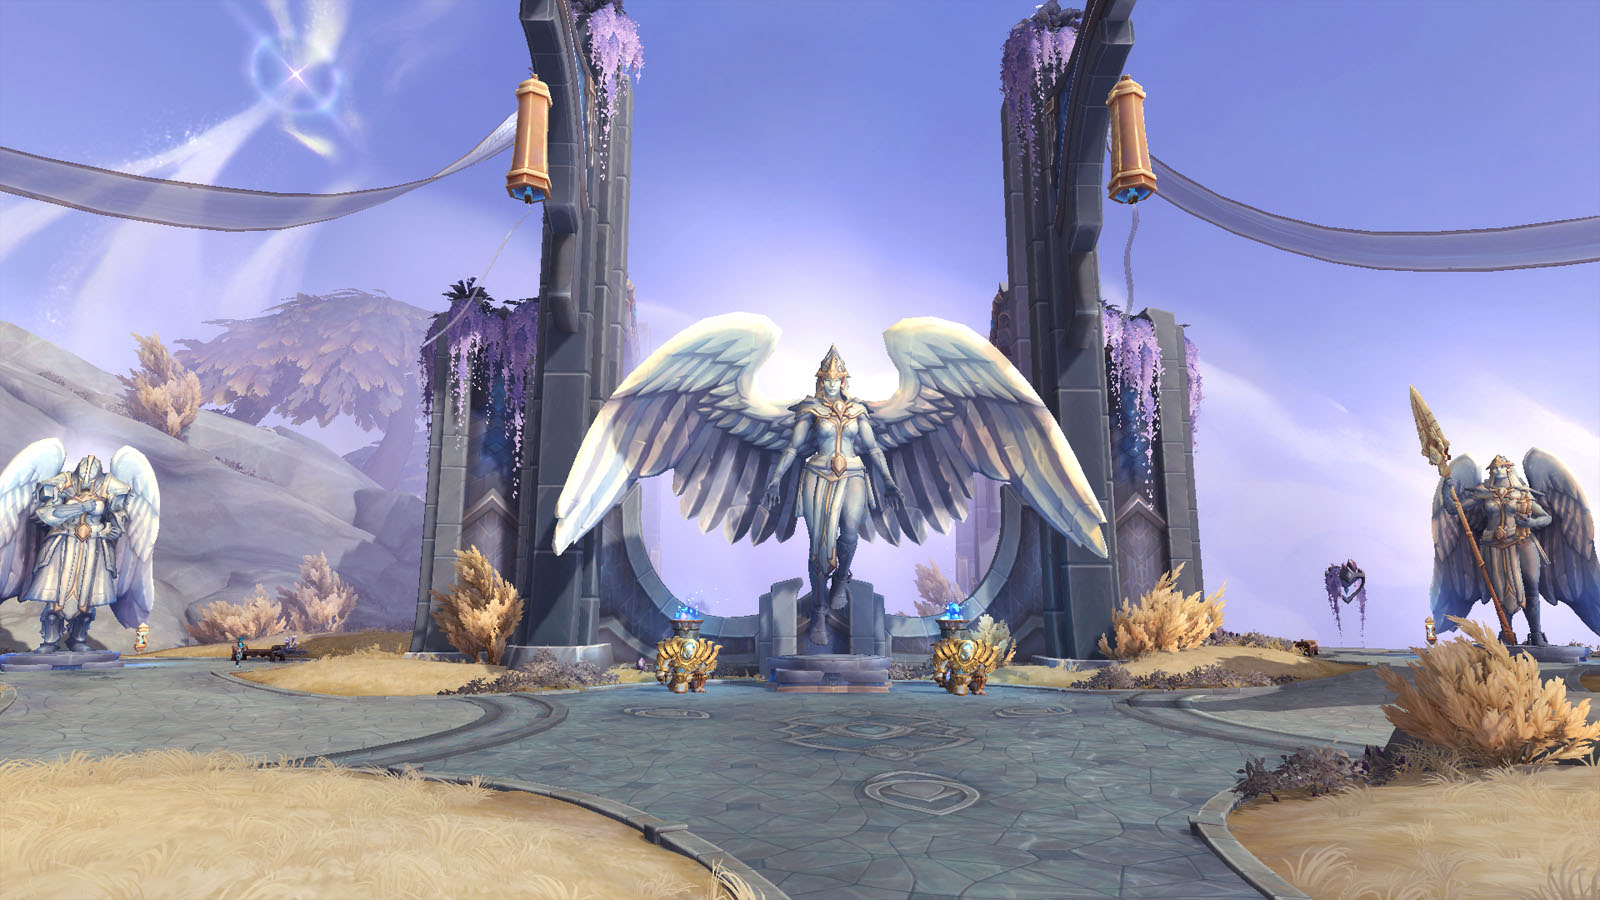 World of Warcraft (for PC) Review